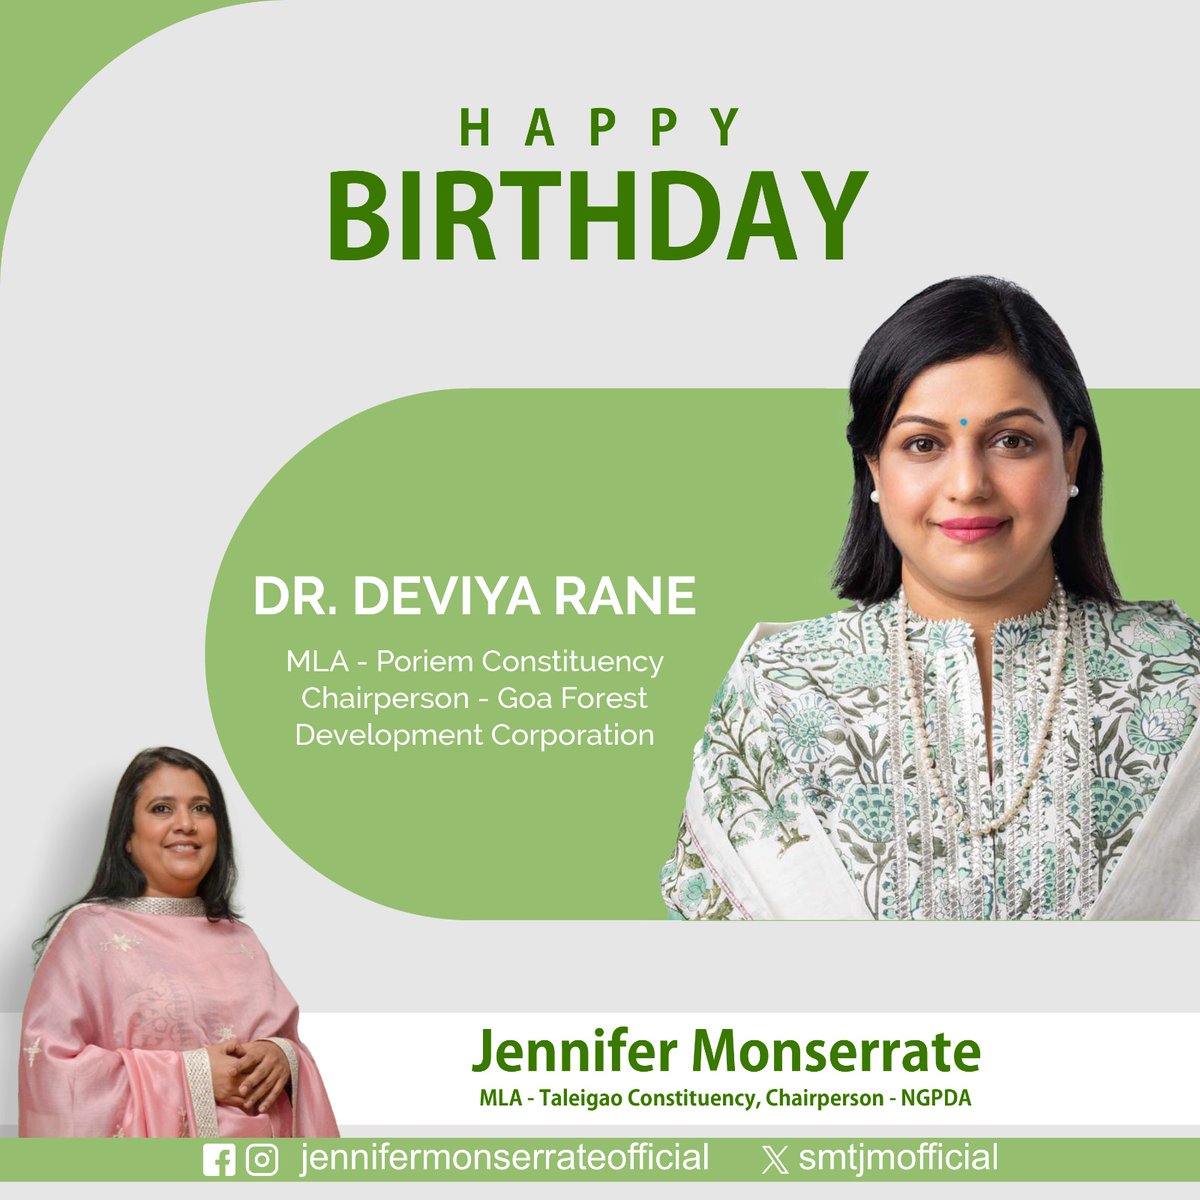 Extending warm birthday wishes to @draneofficial, MLA of Poriem Constituency and Chairperson of Goa Forest Development Corporation. Wishing you another year of prosperity, fulfillment and achievements.